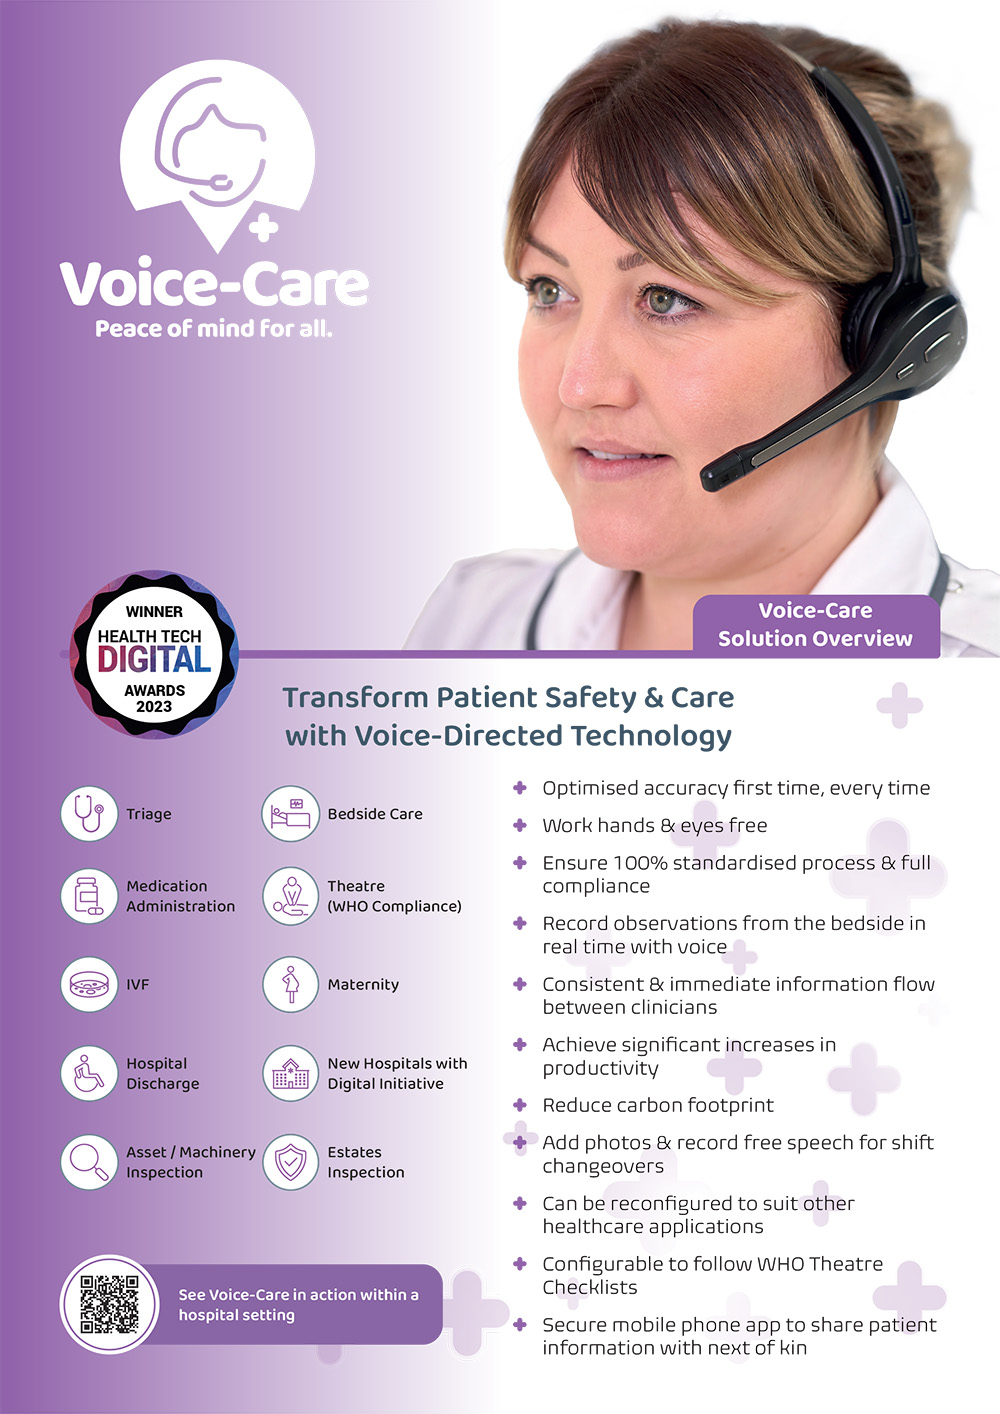 Voice-Care Solution & Family App Overview